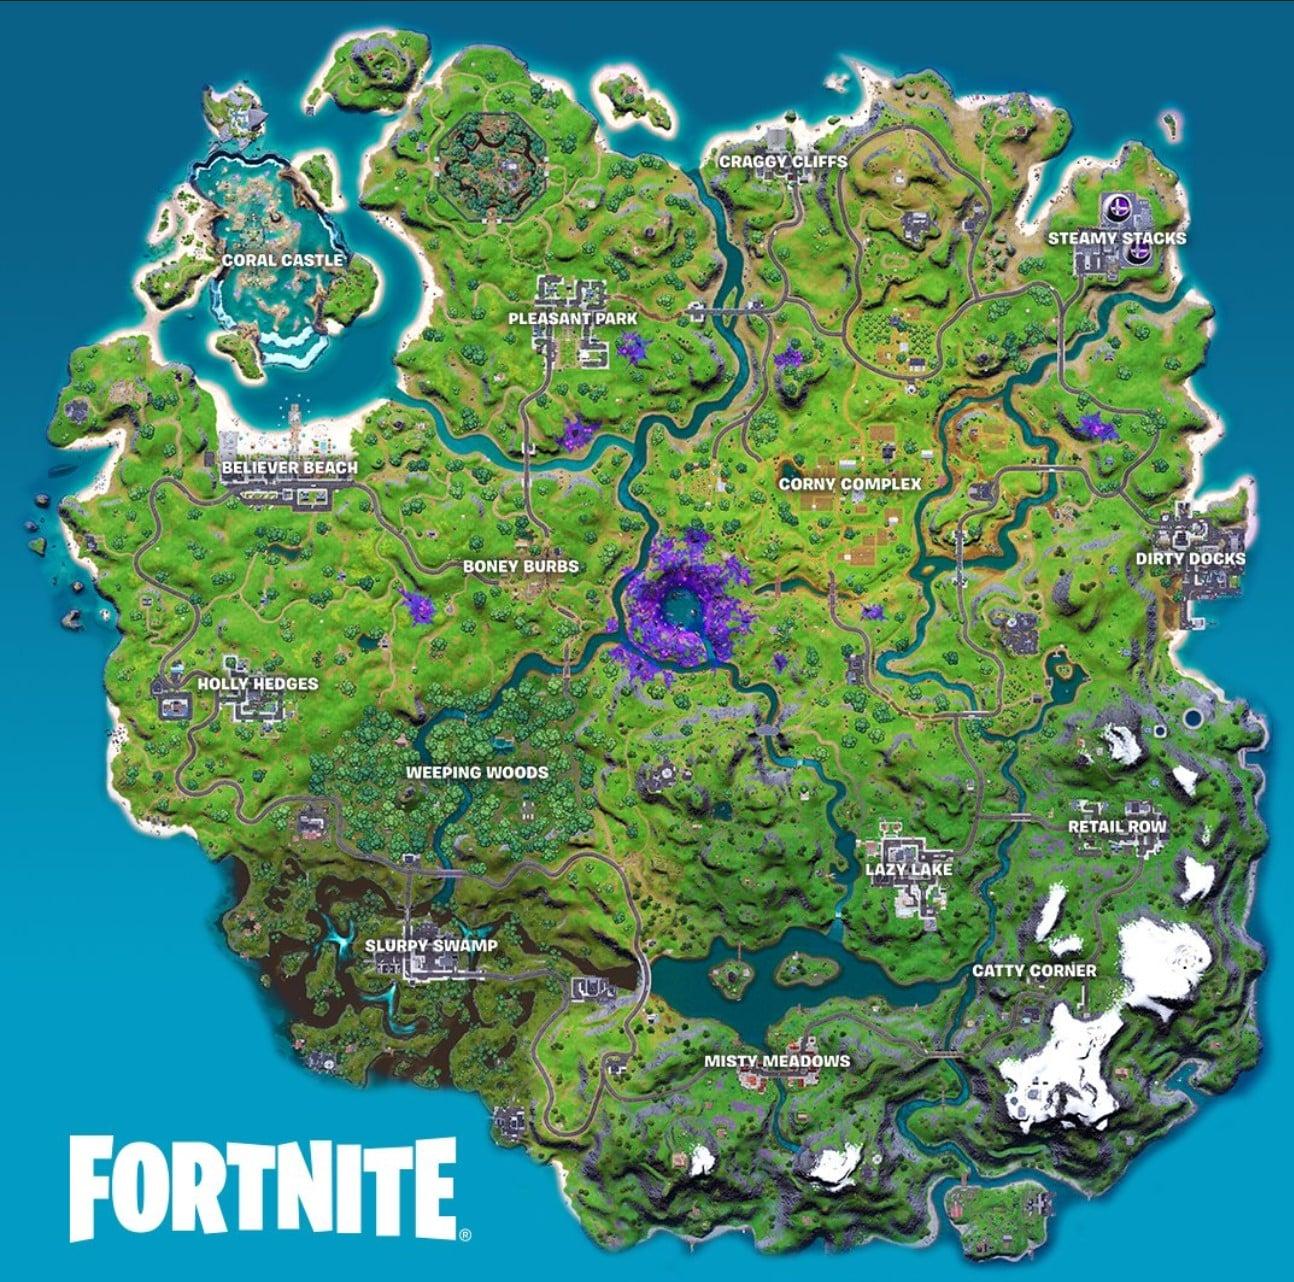 Fortnite Season 7 full map with named locations